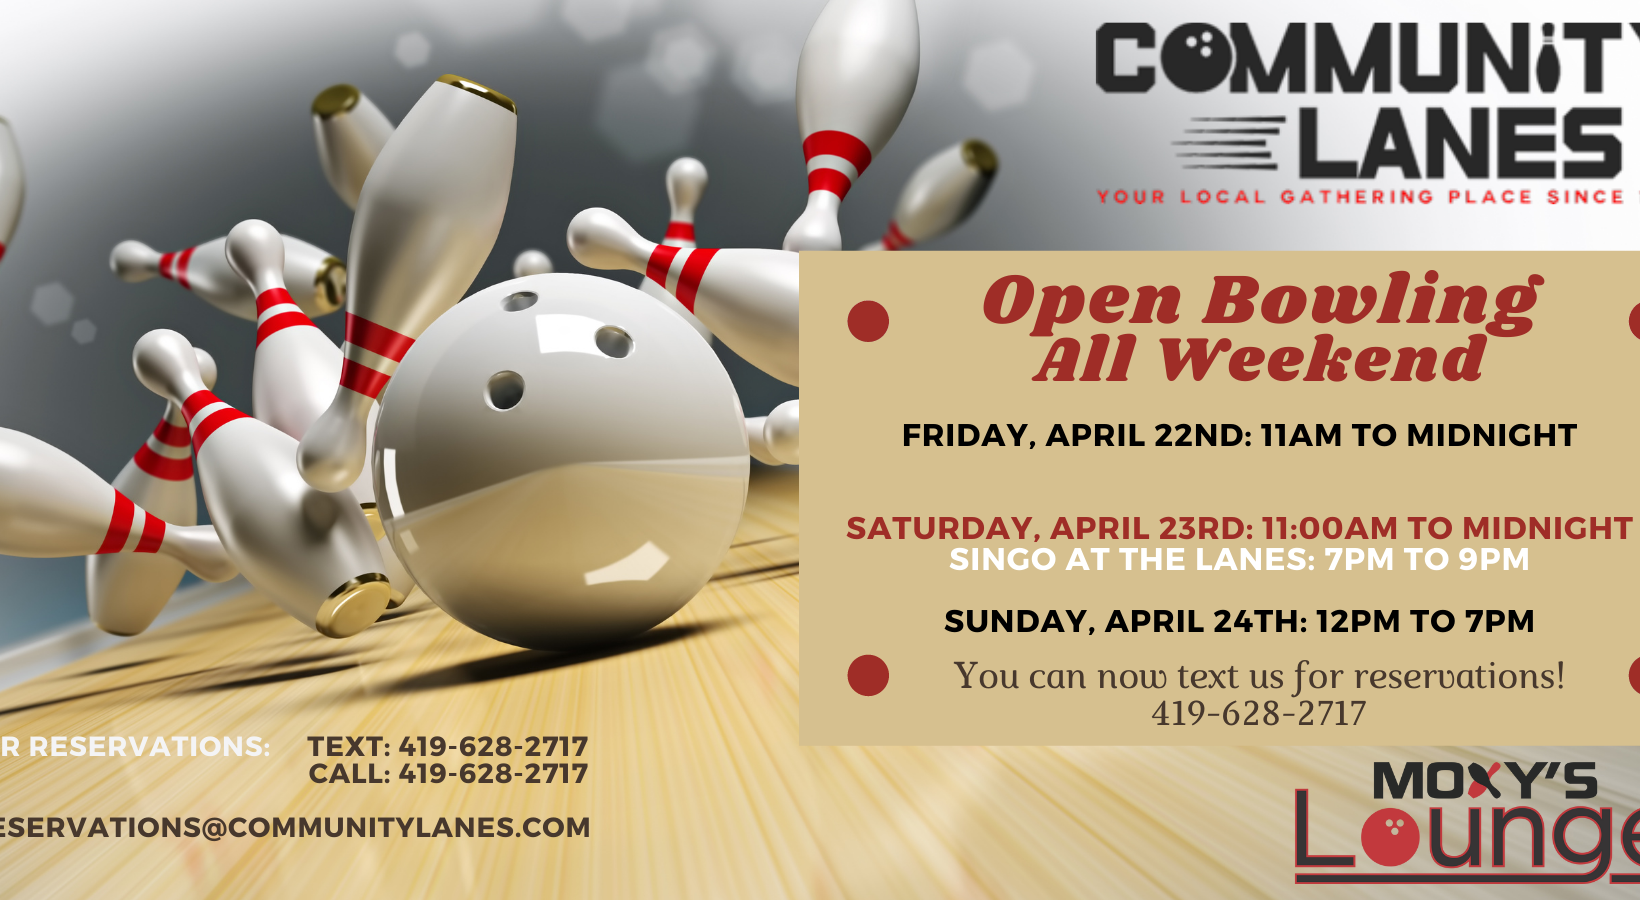 Open Bowling this weekend 4-20-2022